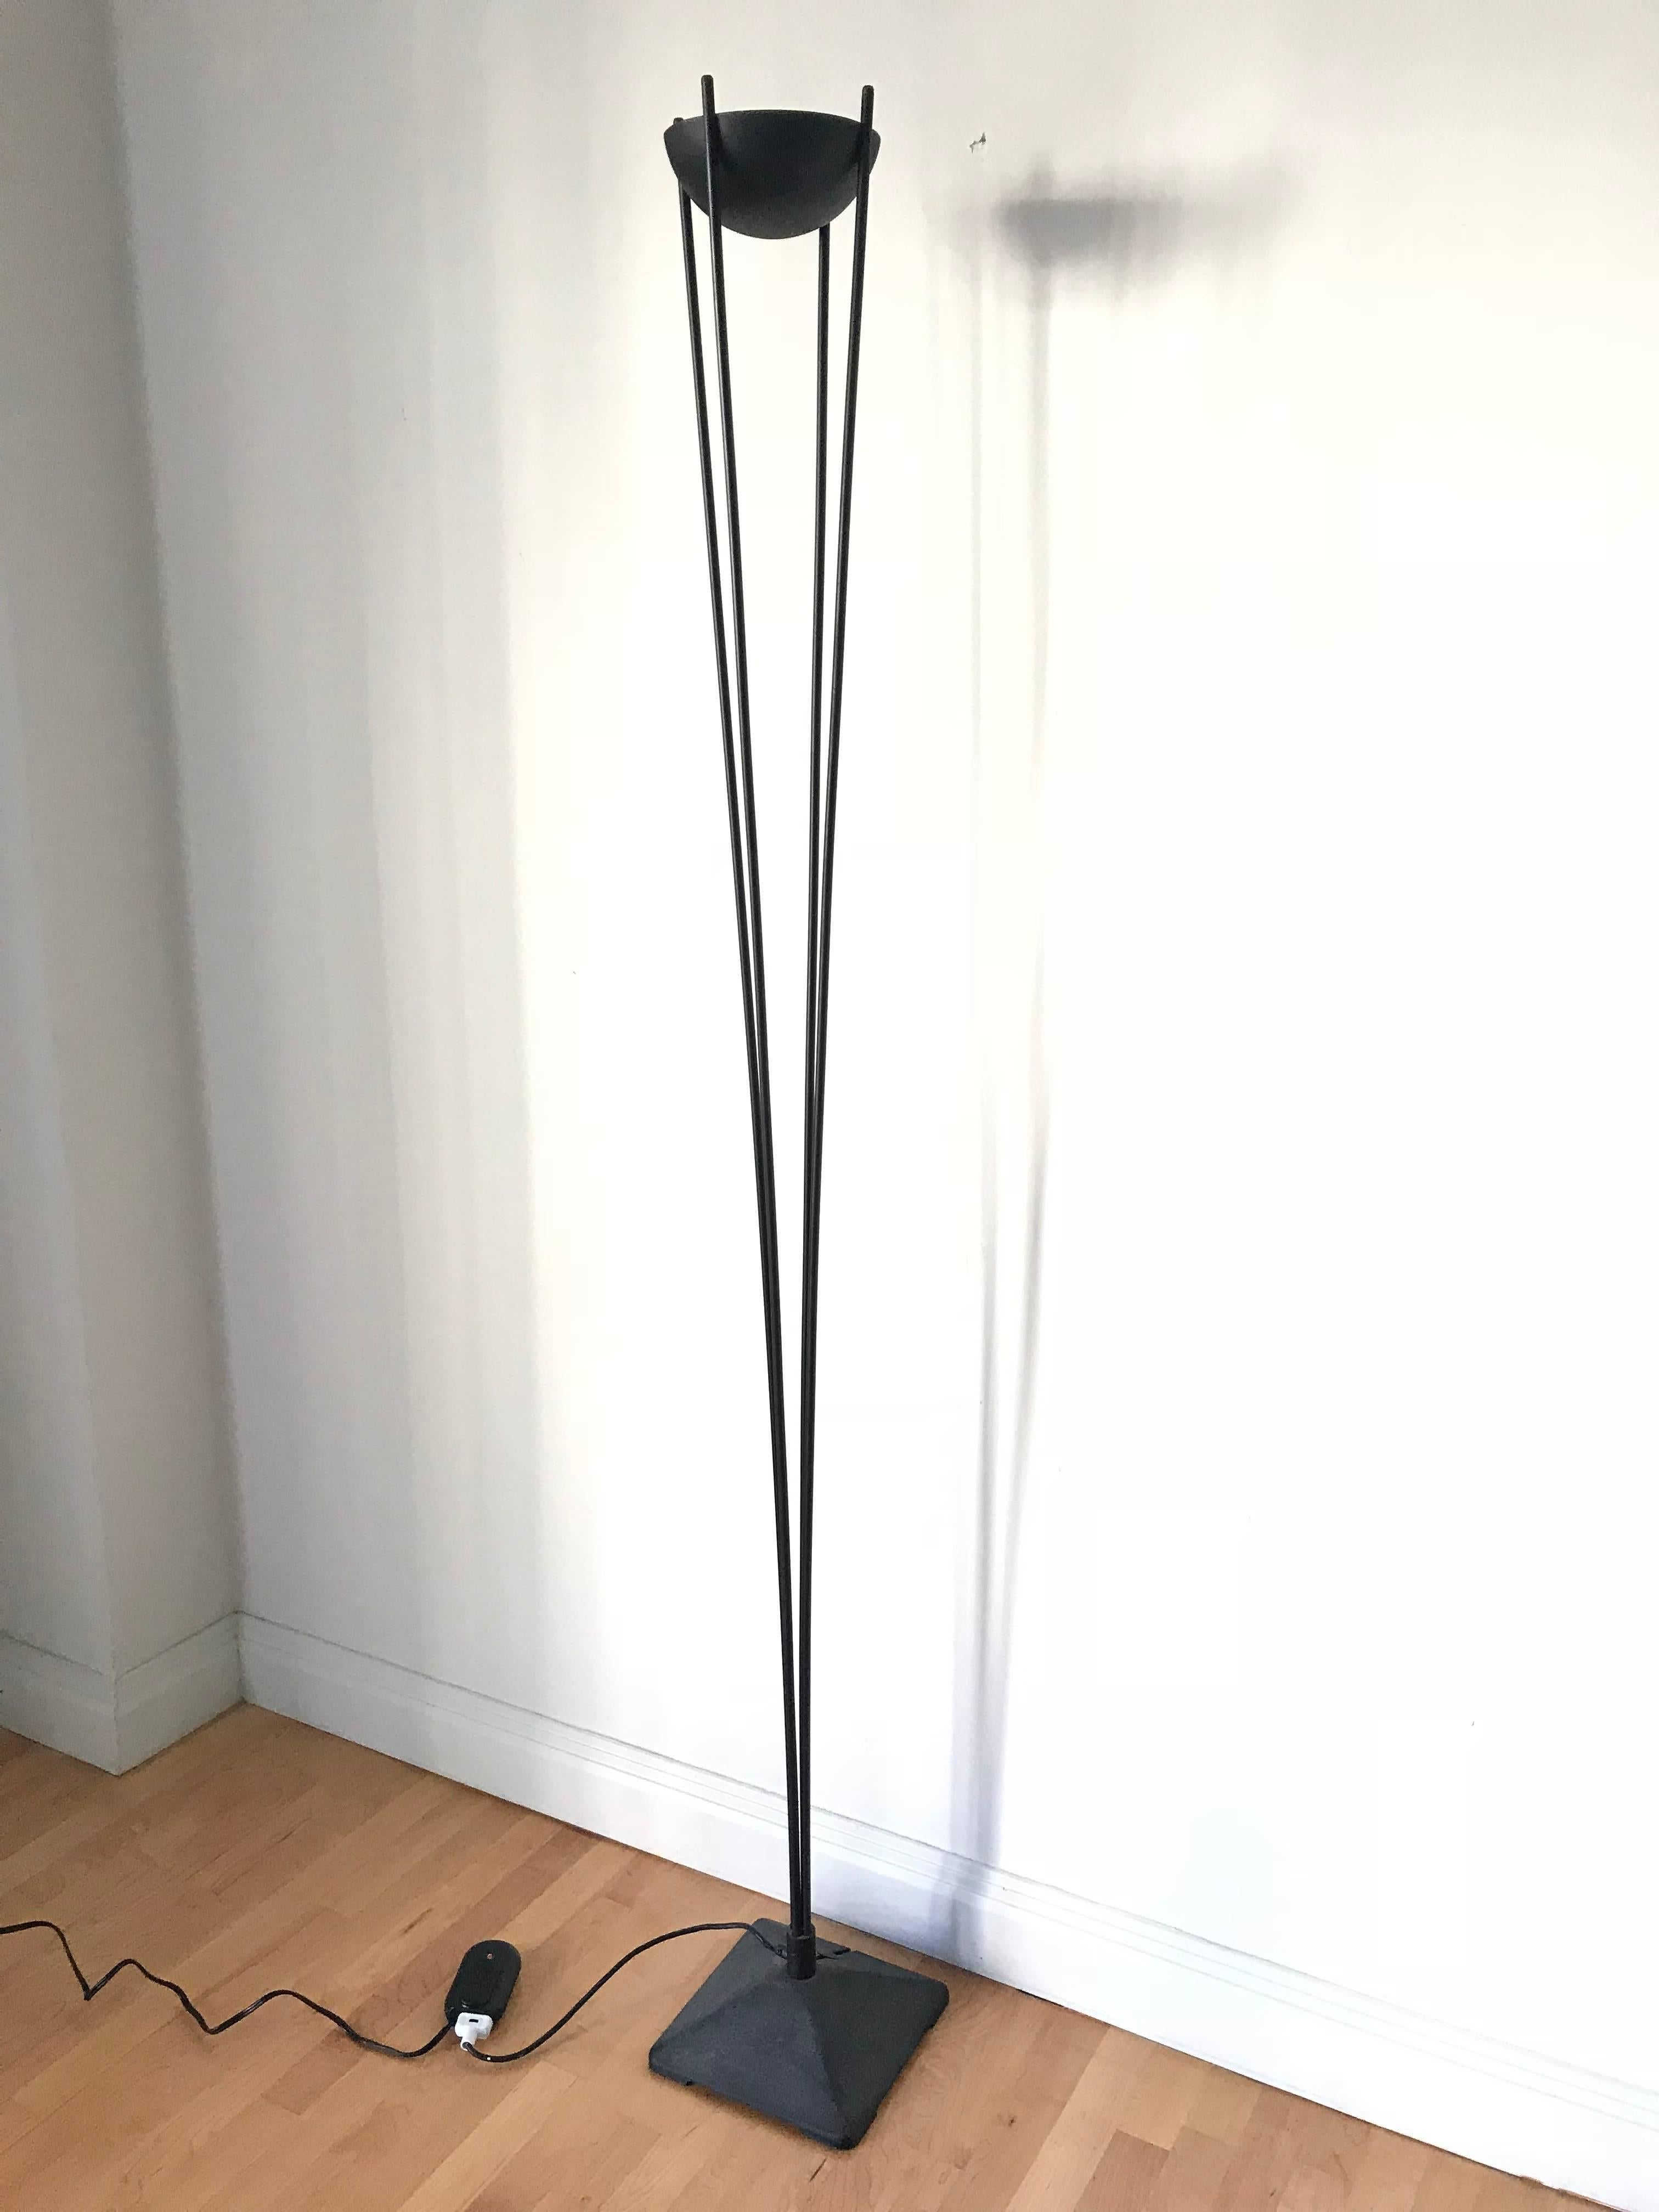 Koch & Lowy Postmodern torchiere floor lamps with a weighted base holding four rods supporting an inverted cup light holder, rendered in black powder coated steel.